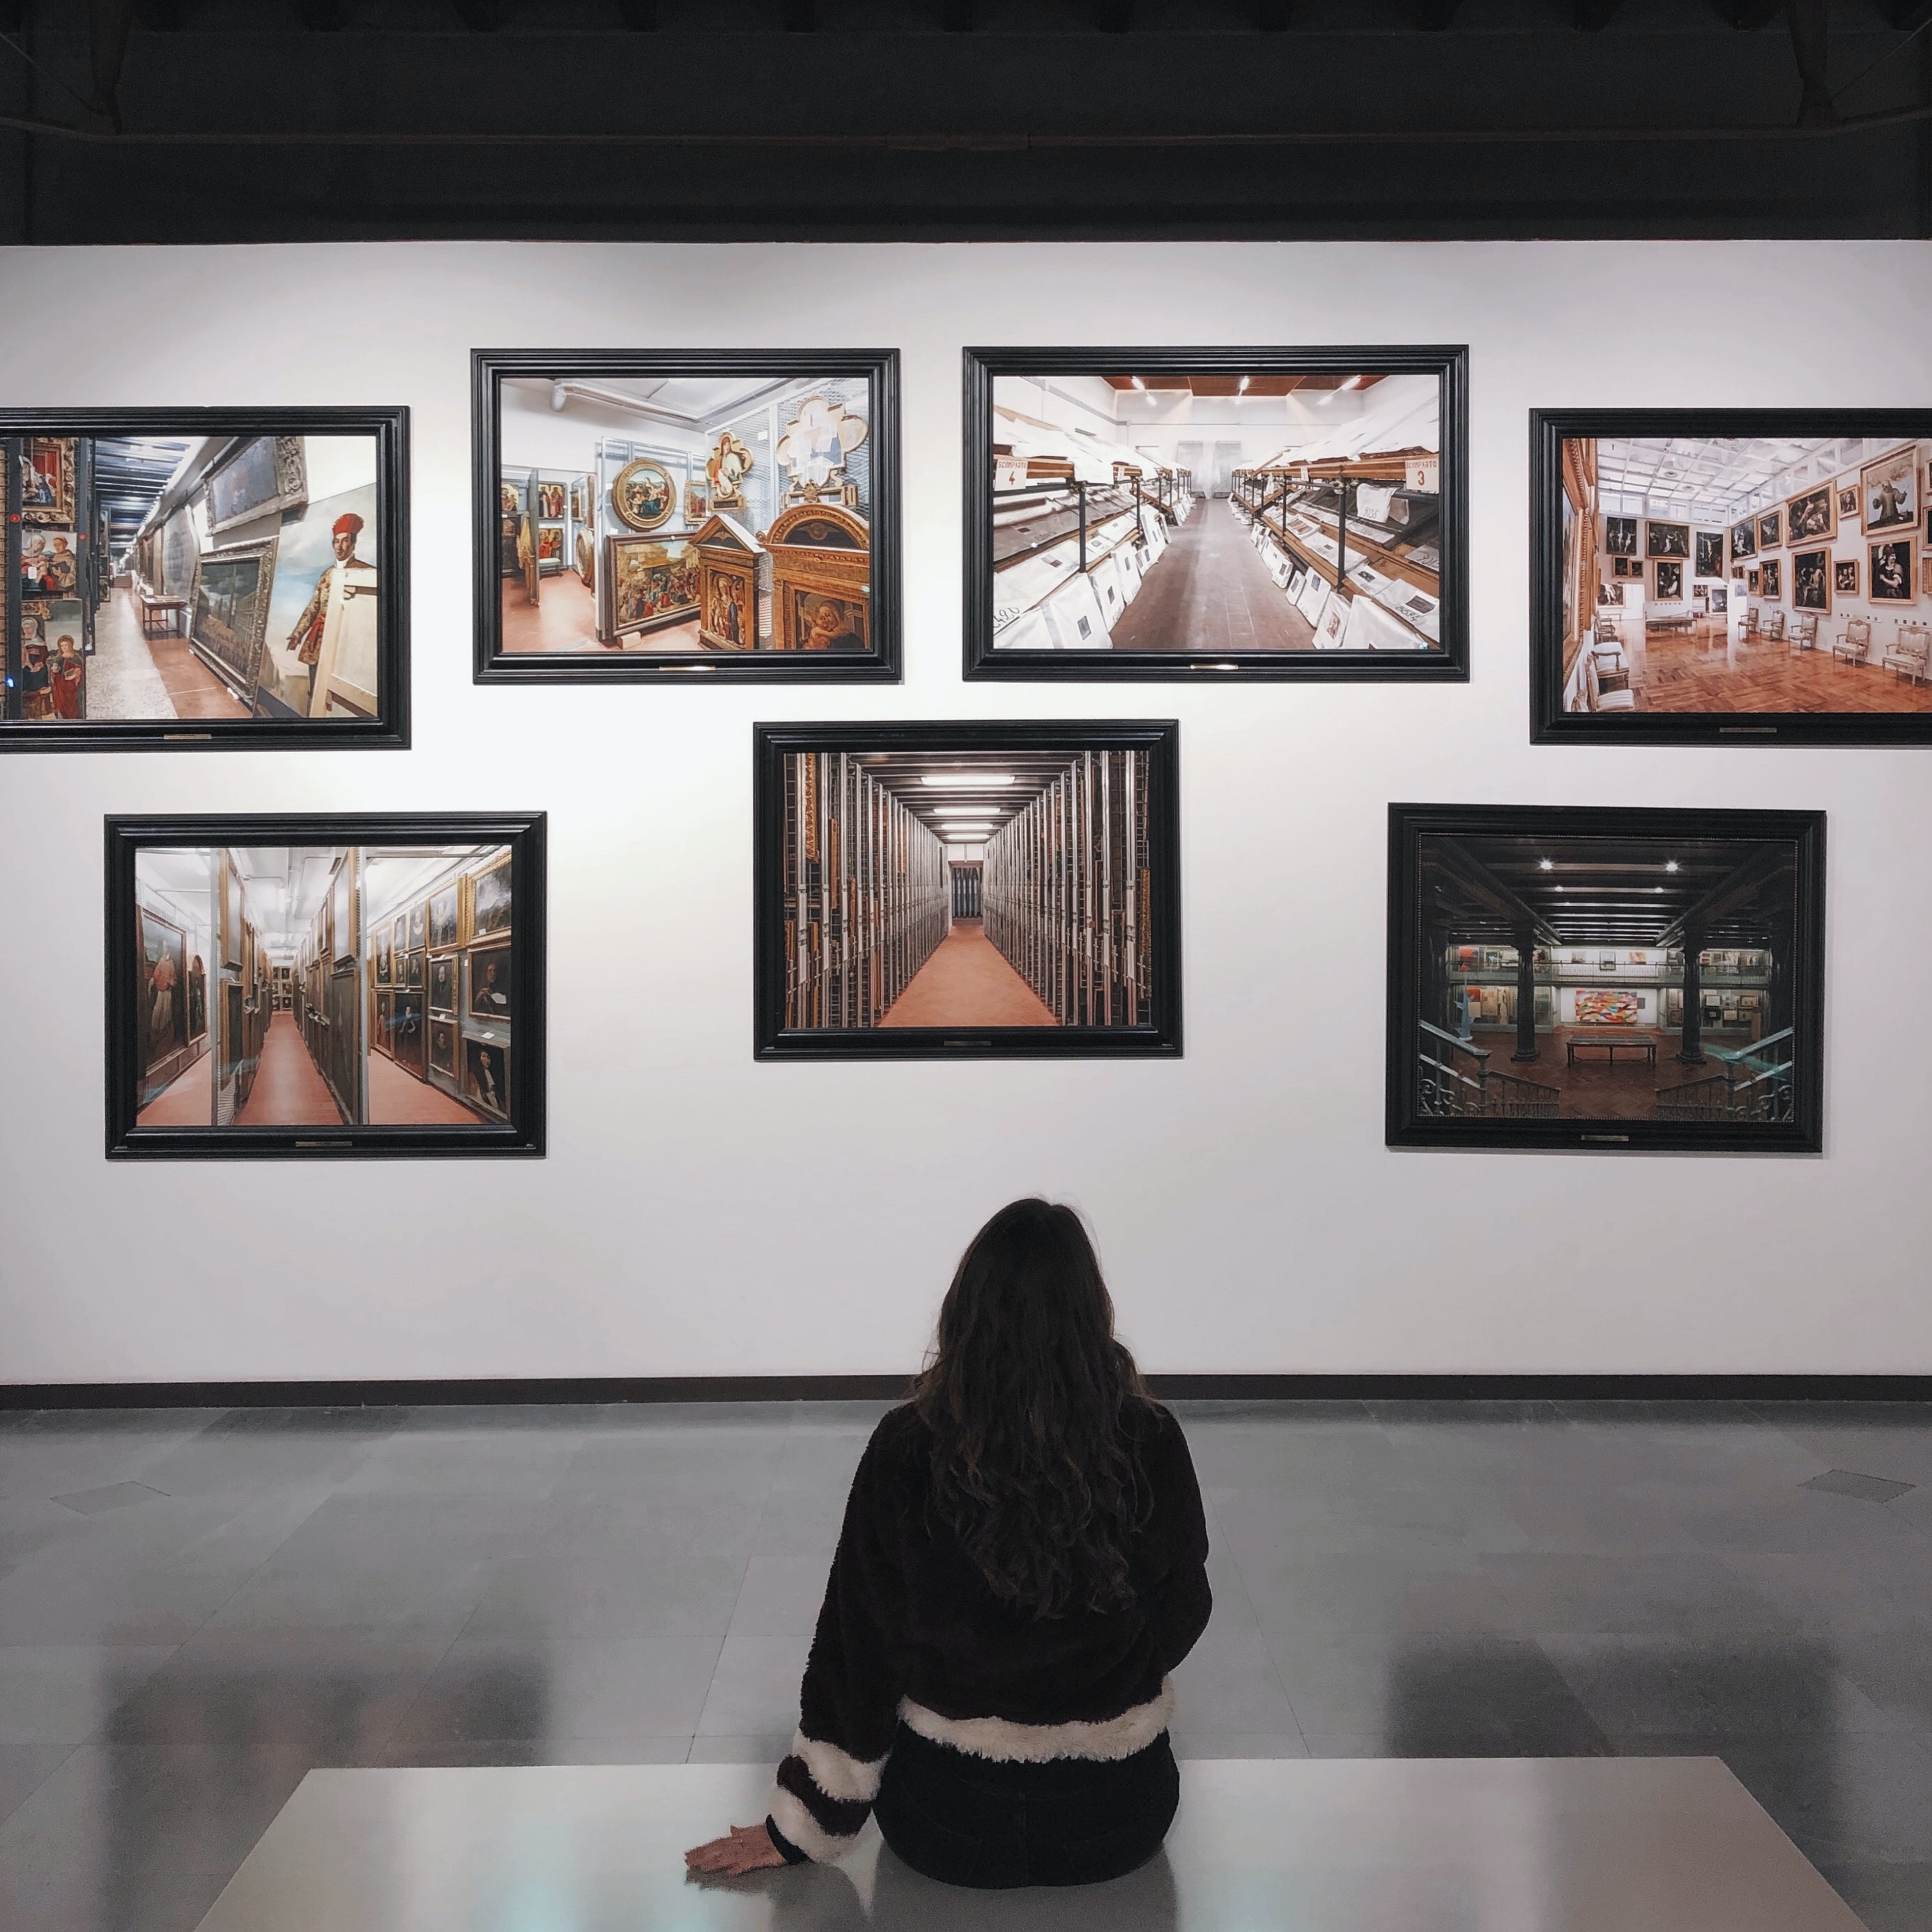 Lady standing on a white bench inside a gallery looking at 9 paintings of varying sizes on a grey wall